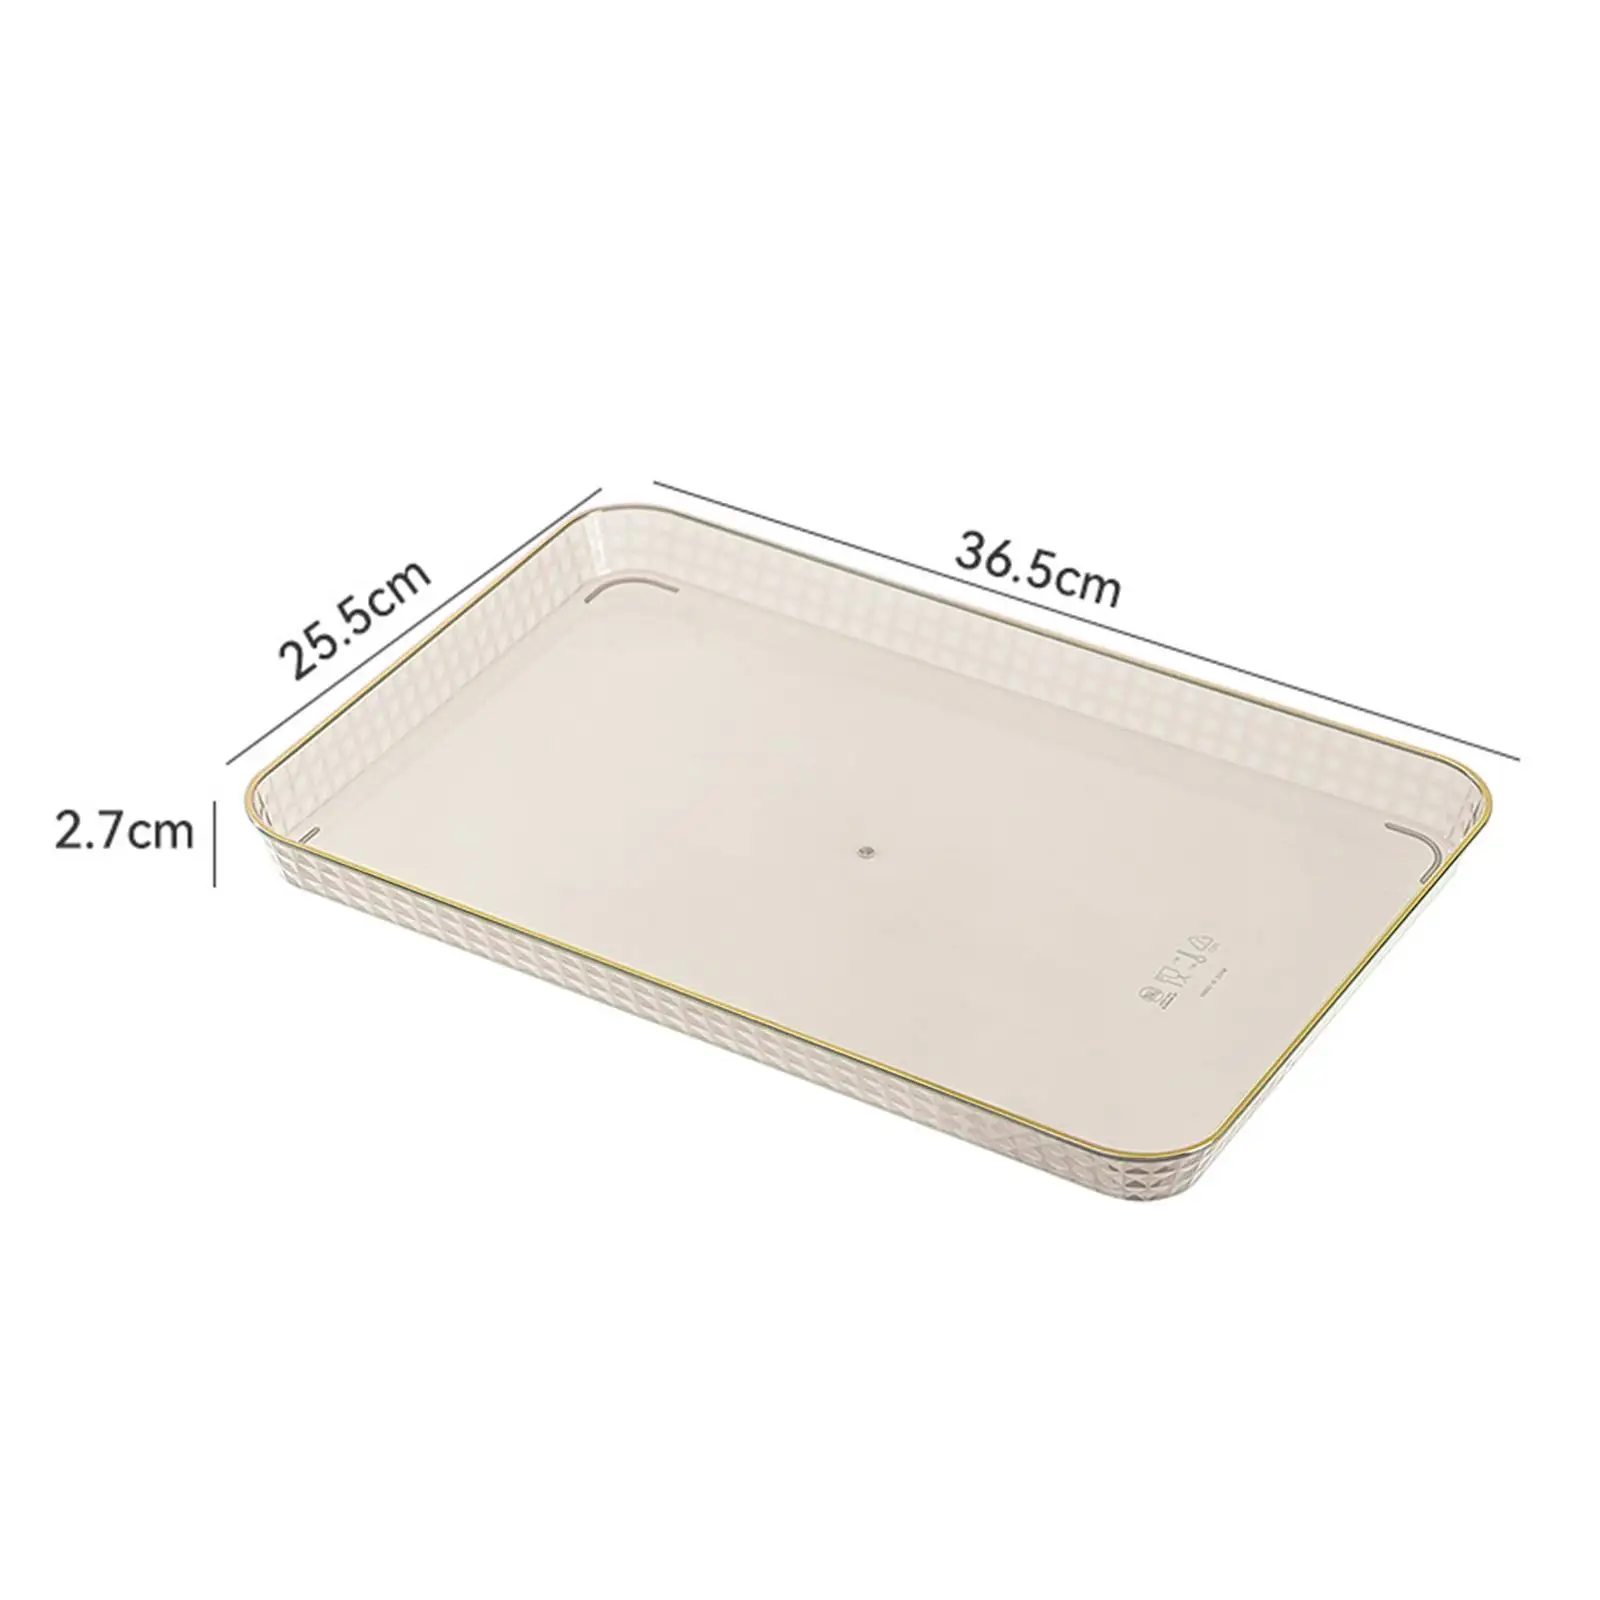 Serving Tray Multifunctional Serving Platters Rectangular for Tea Party